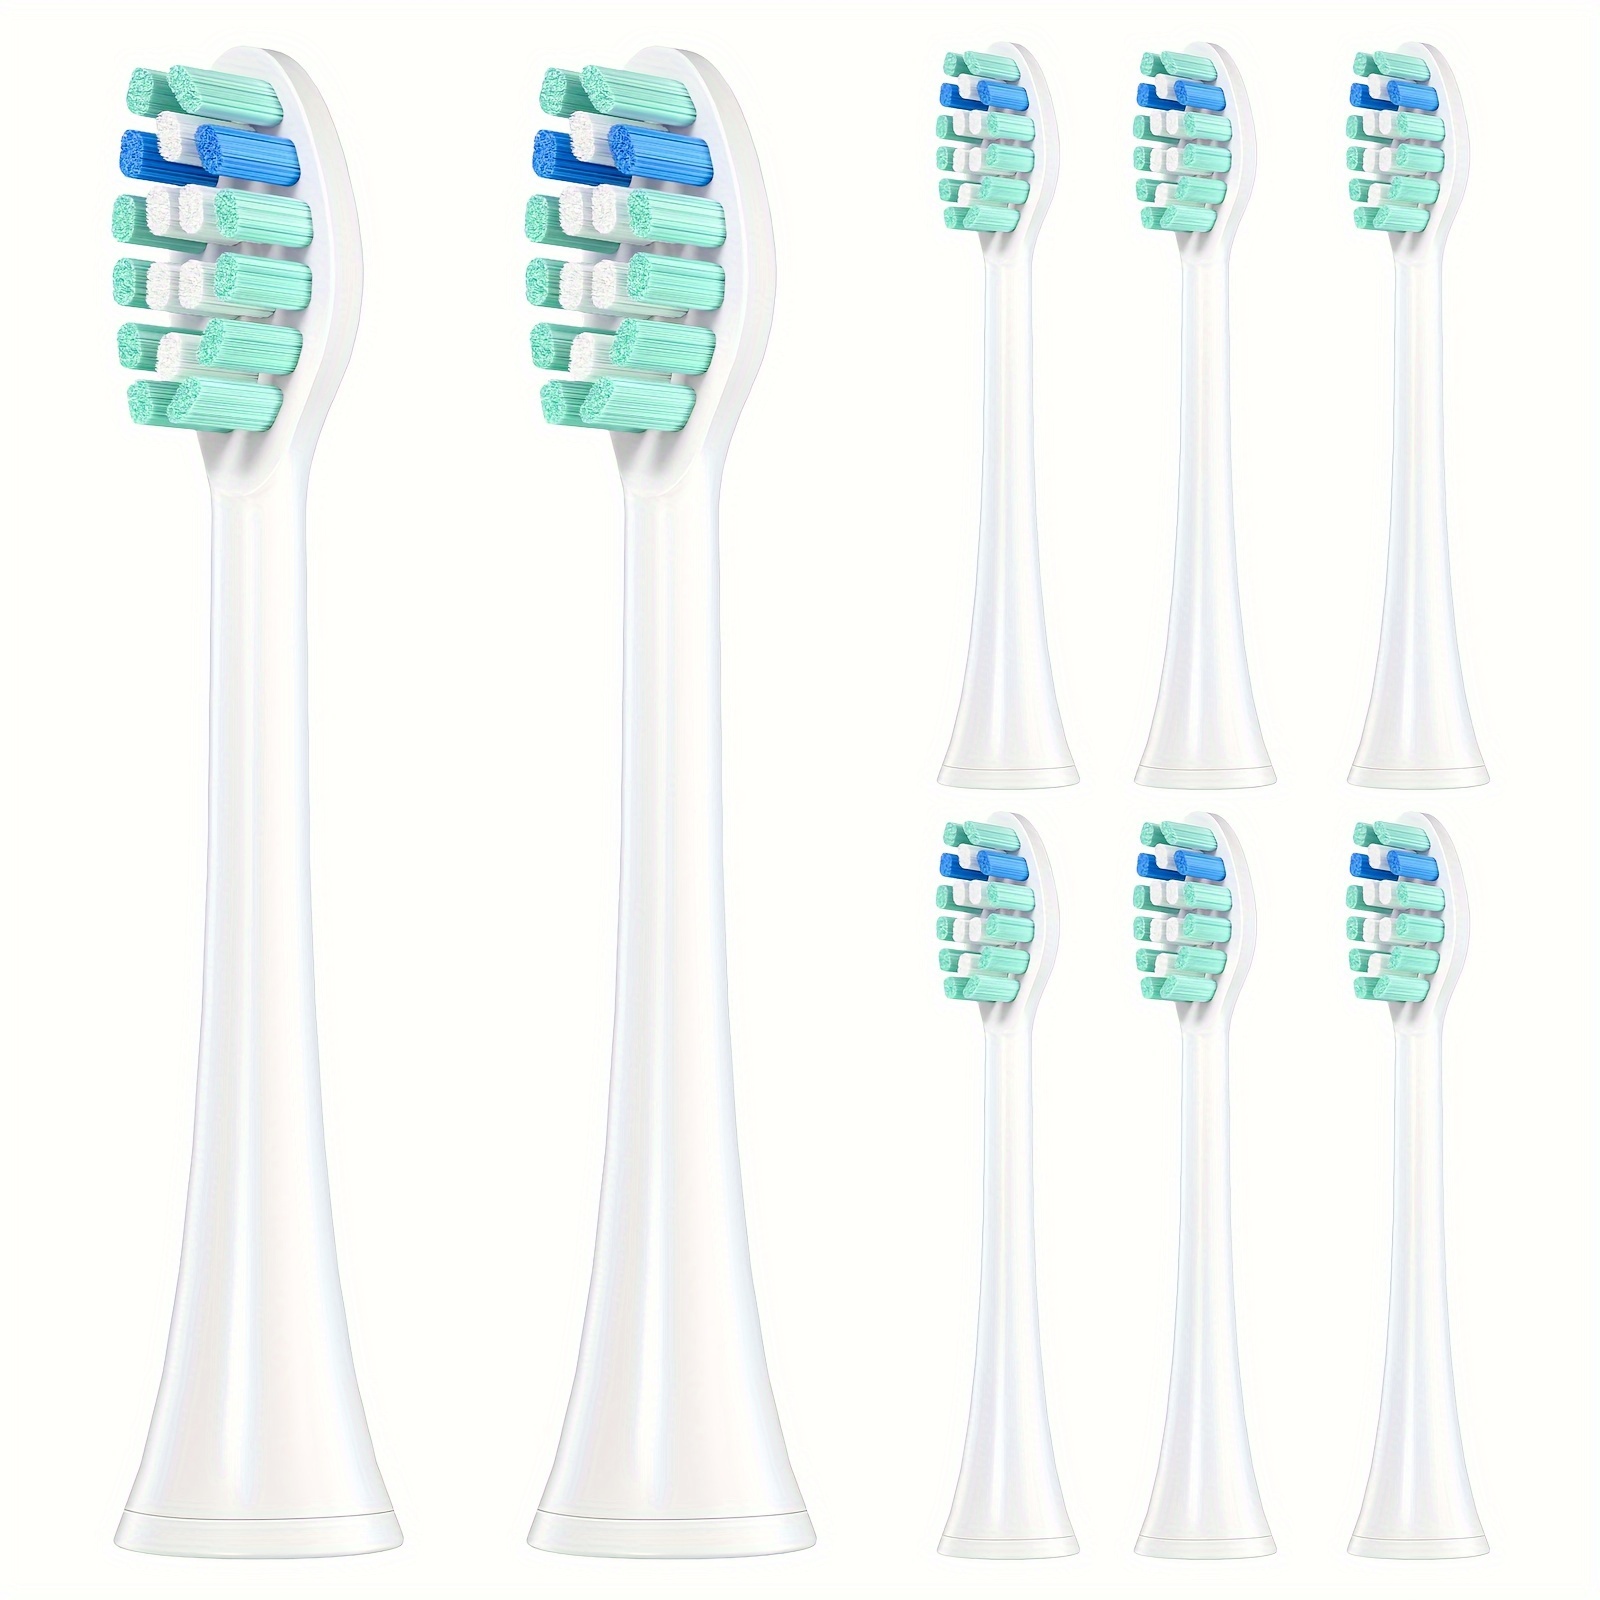 

Replacement Toothbrush Heads For Philips Sonicare Replacement Heads, Brush Heads Compatible With Phillips Sonicare Snap-on Electric Tooth Brushes, 8 Pack